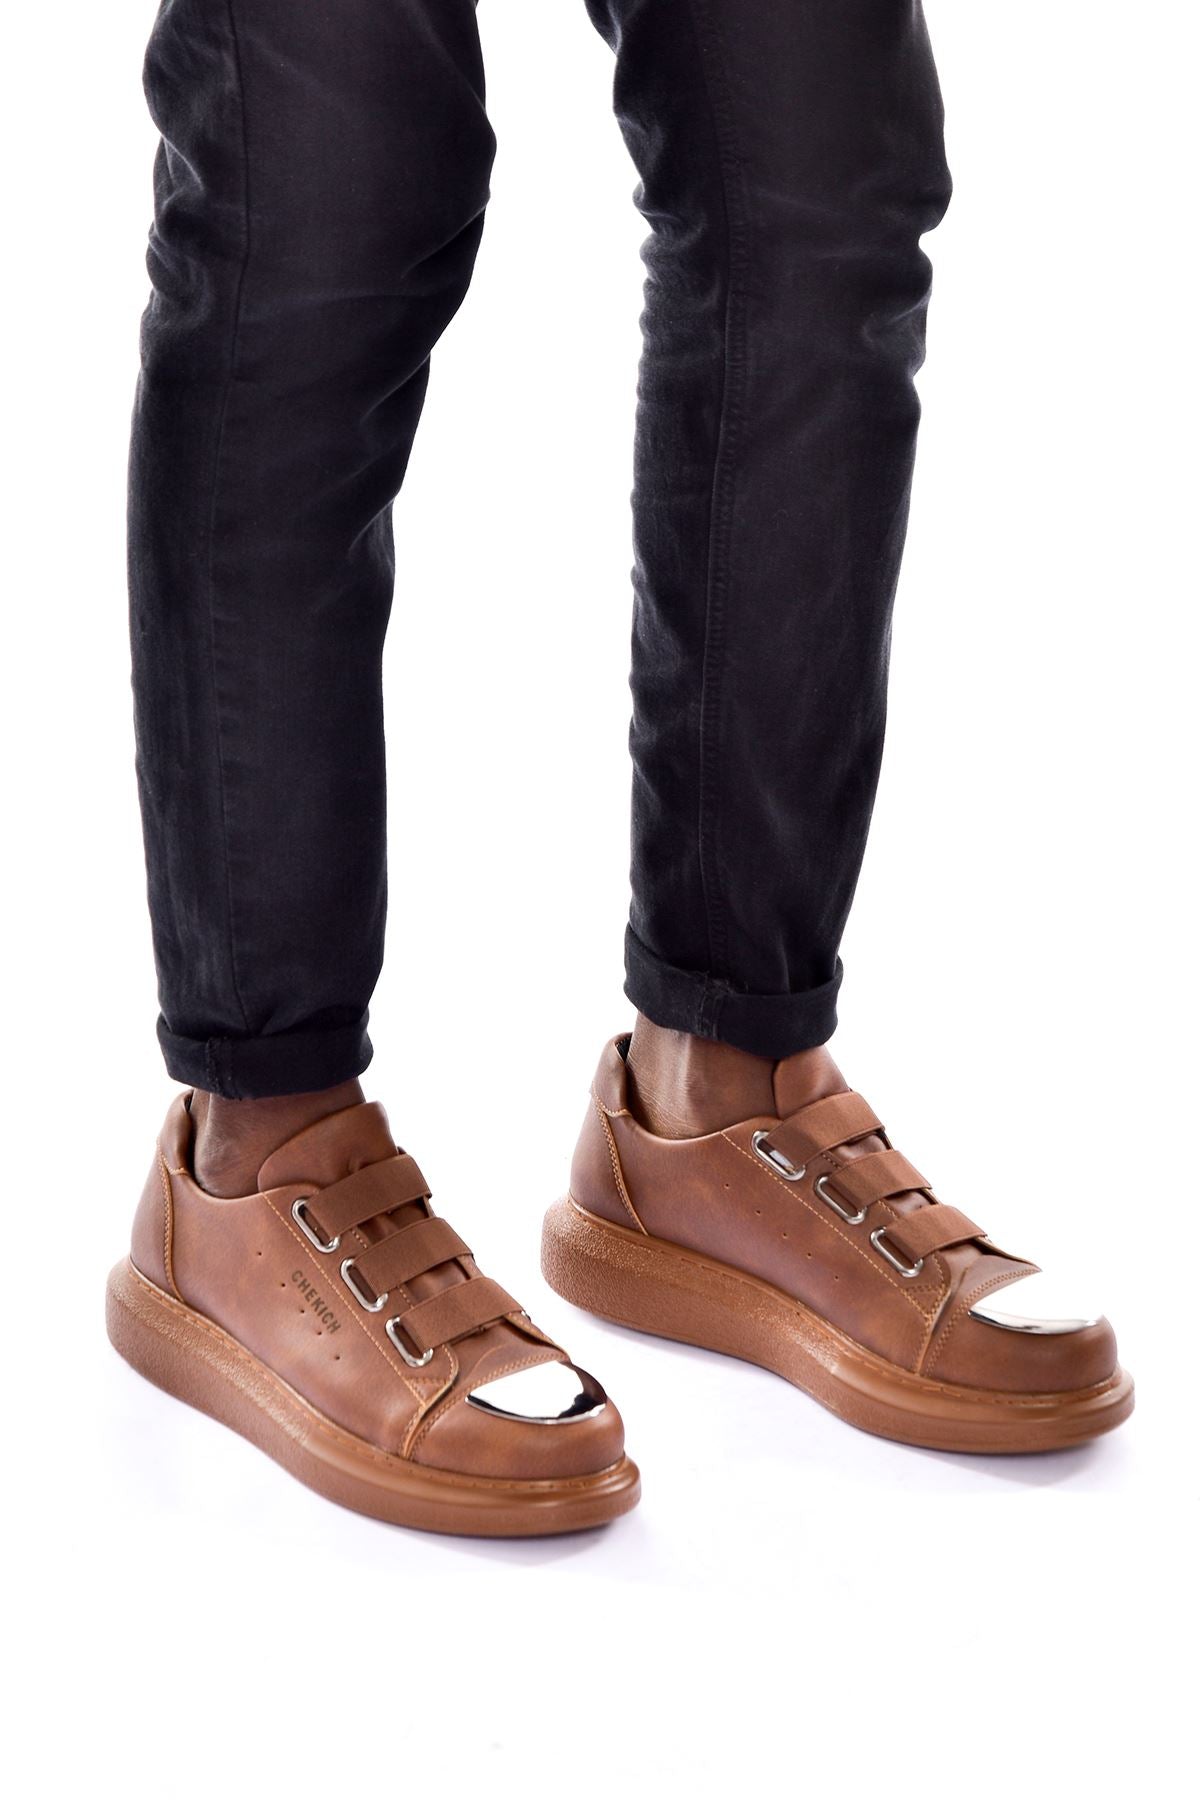 CH251 BT Men's Shoes Sneakers Brown - STREETMODE™